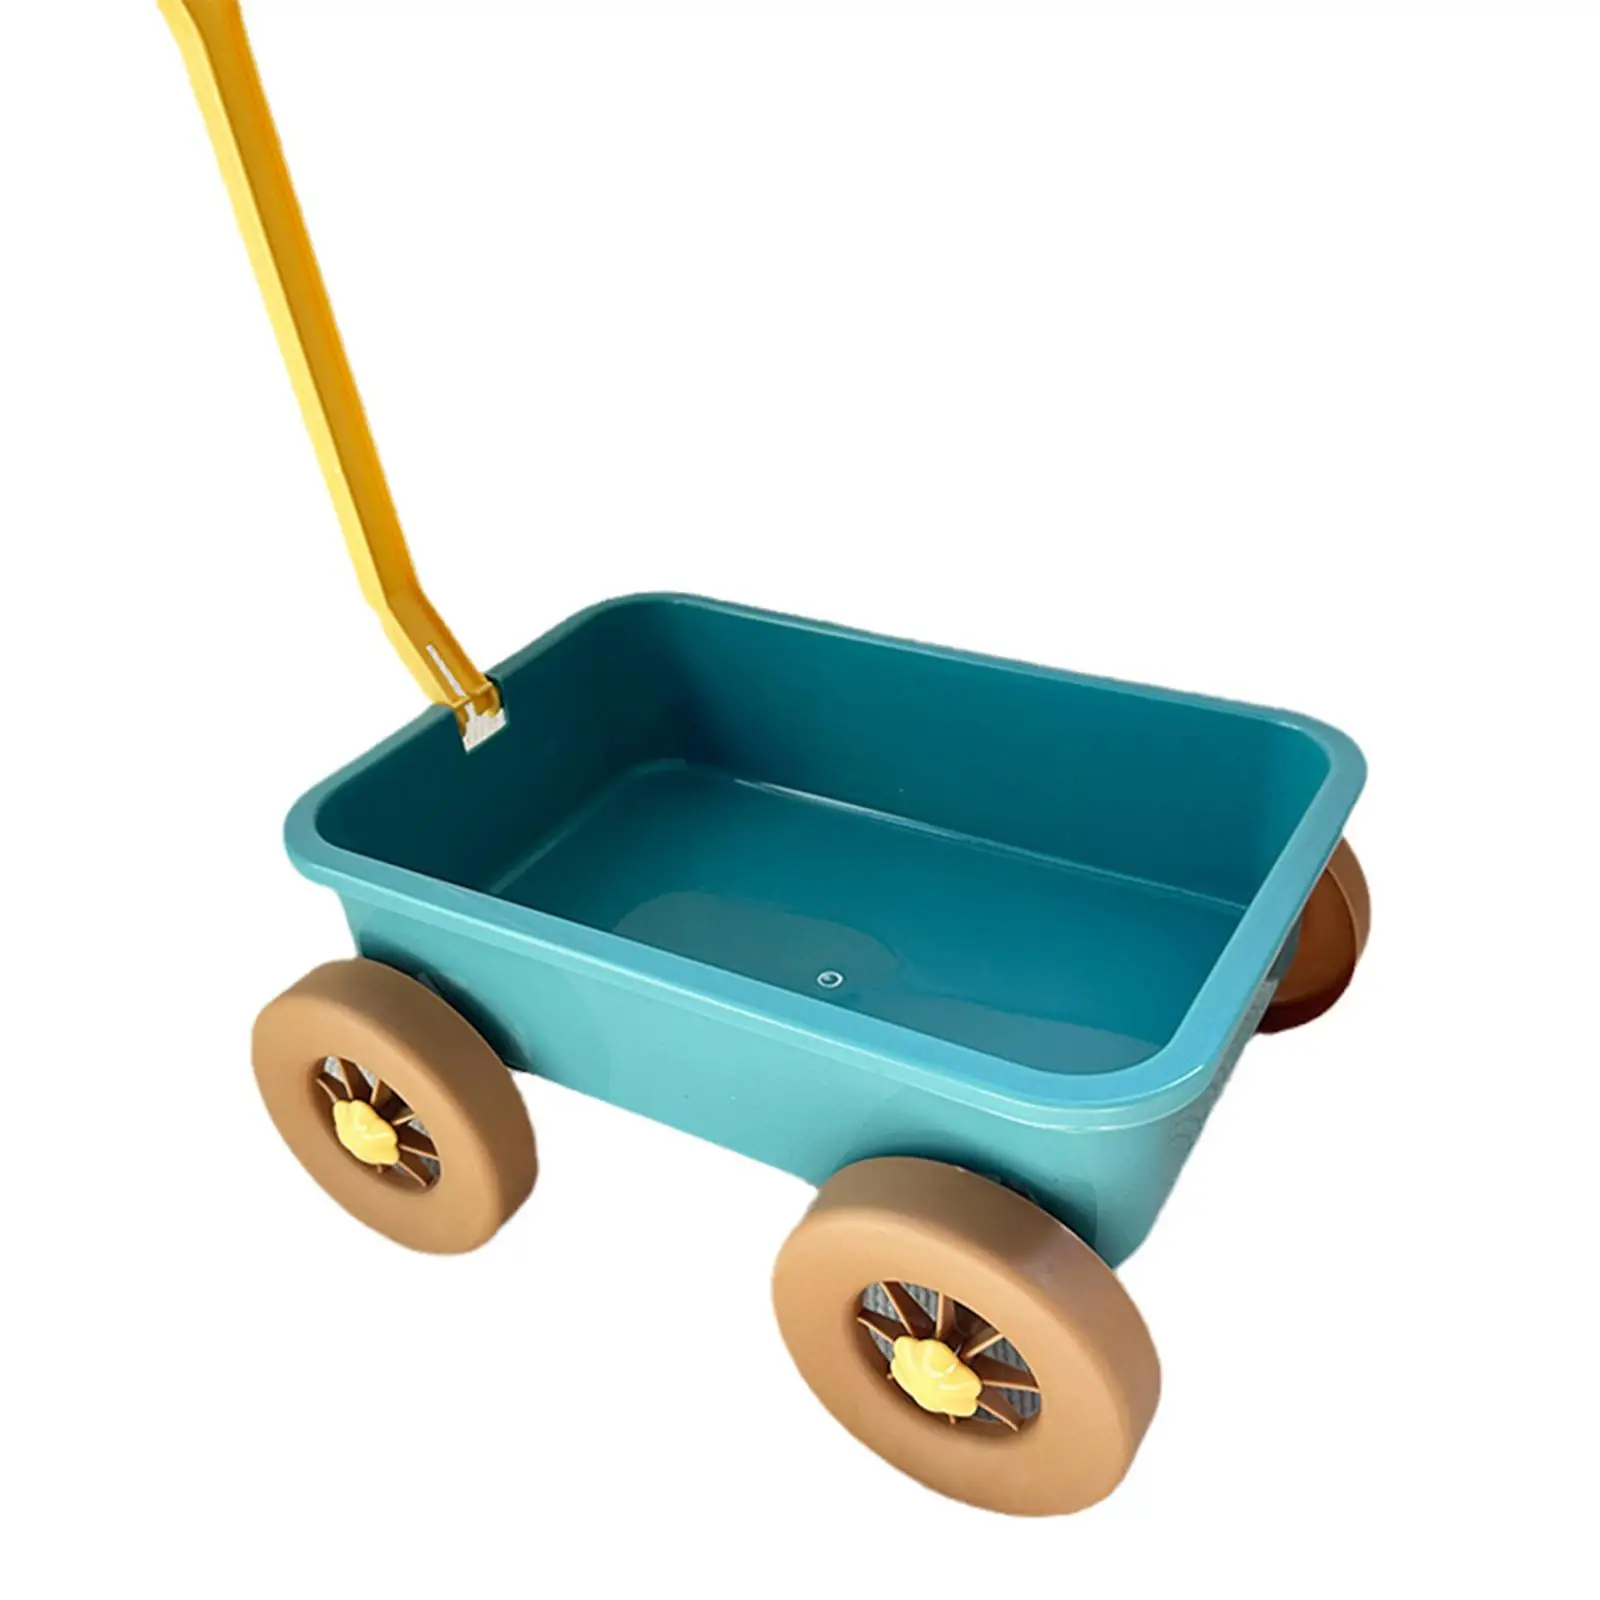 Beach Toy Wagon Tool Toy Multiuse Handheld Pretend Play Wagon Outdoor Toy Vehicle for Household Yard Indoor Seaside Children